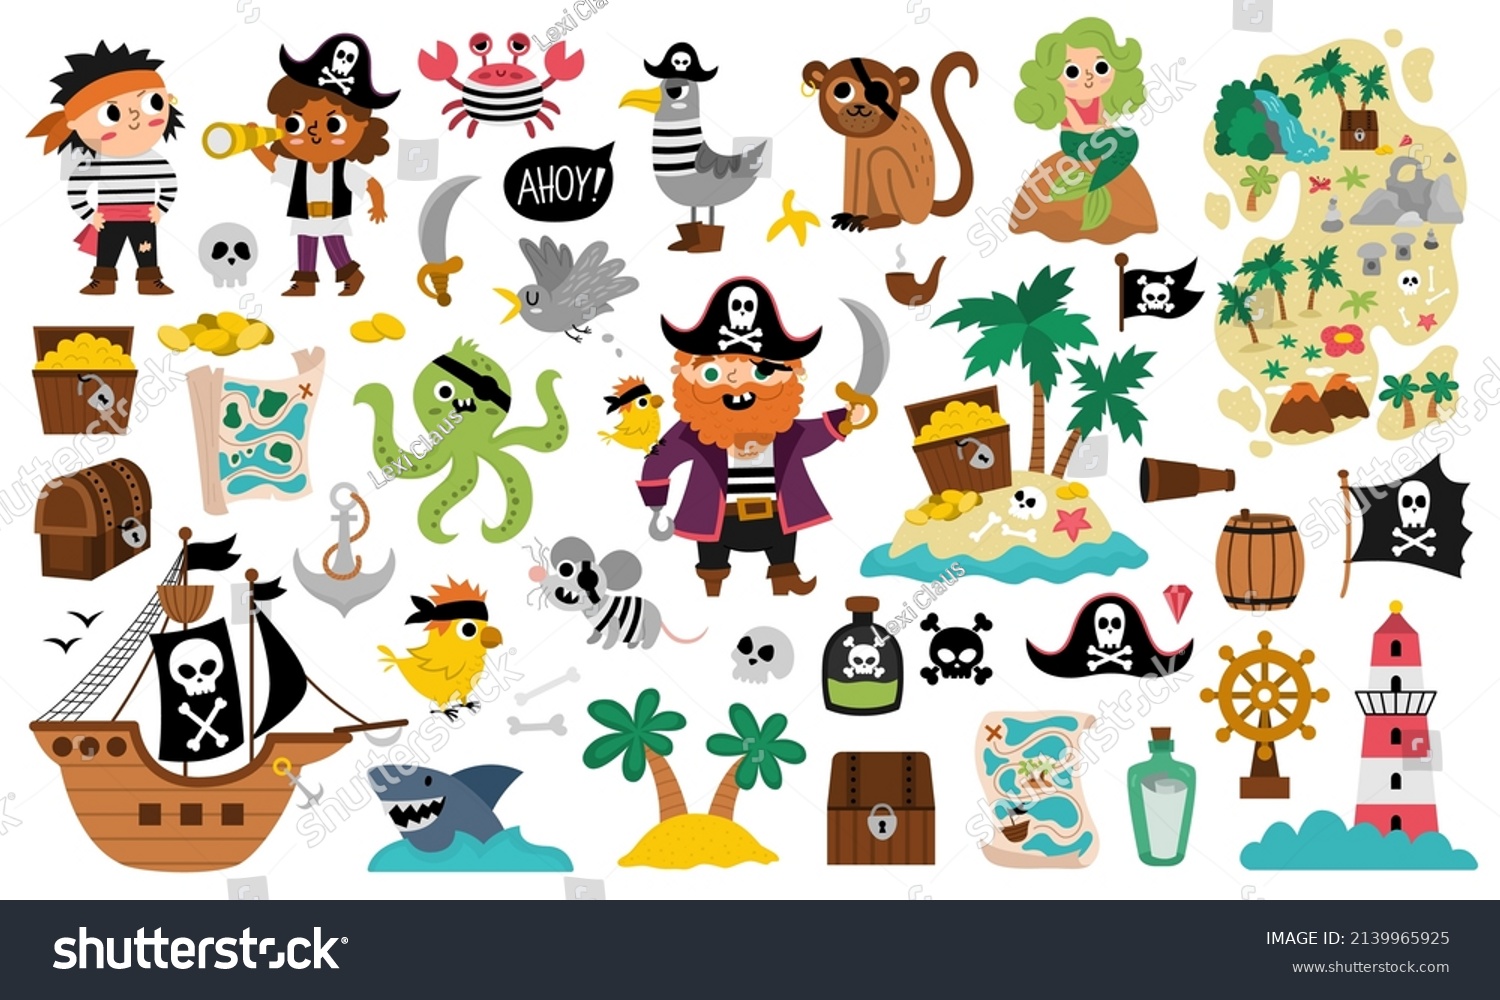 SVG of Vector pirate set. Cute sea adventures icons collection. Treasure island illustrations with ship, captain, sailors, chest, map, parrot, monkey, map. Funny pirate party elements for kids.
 svg